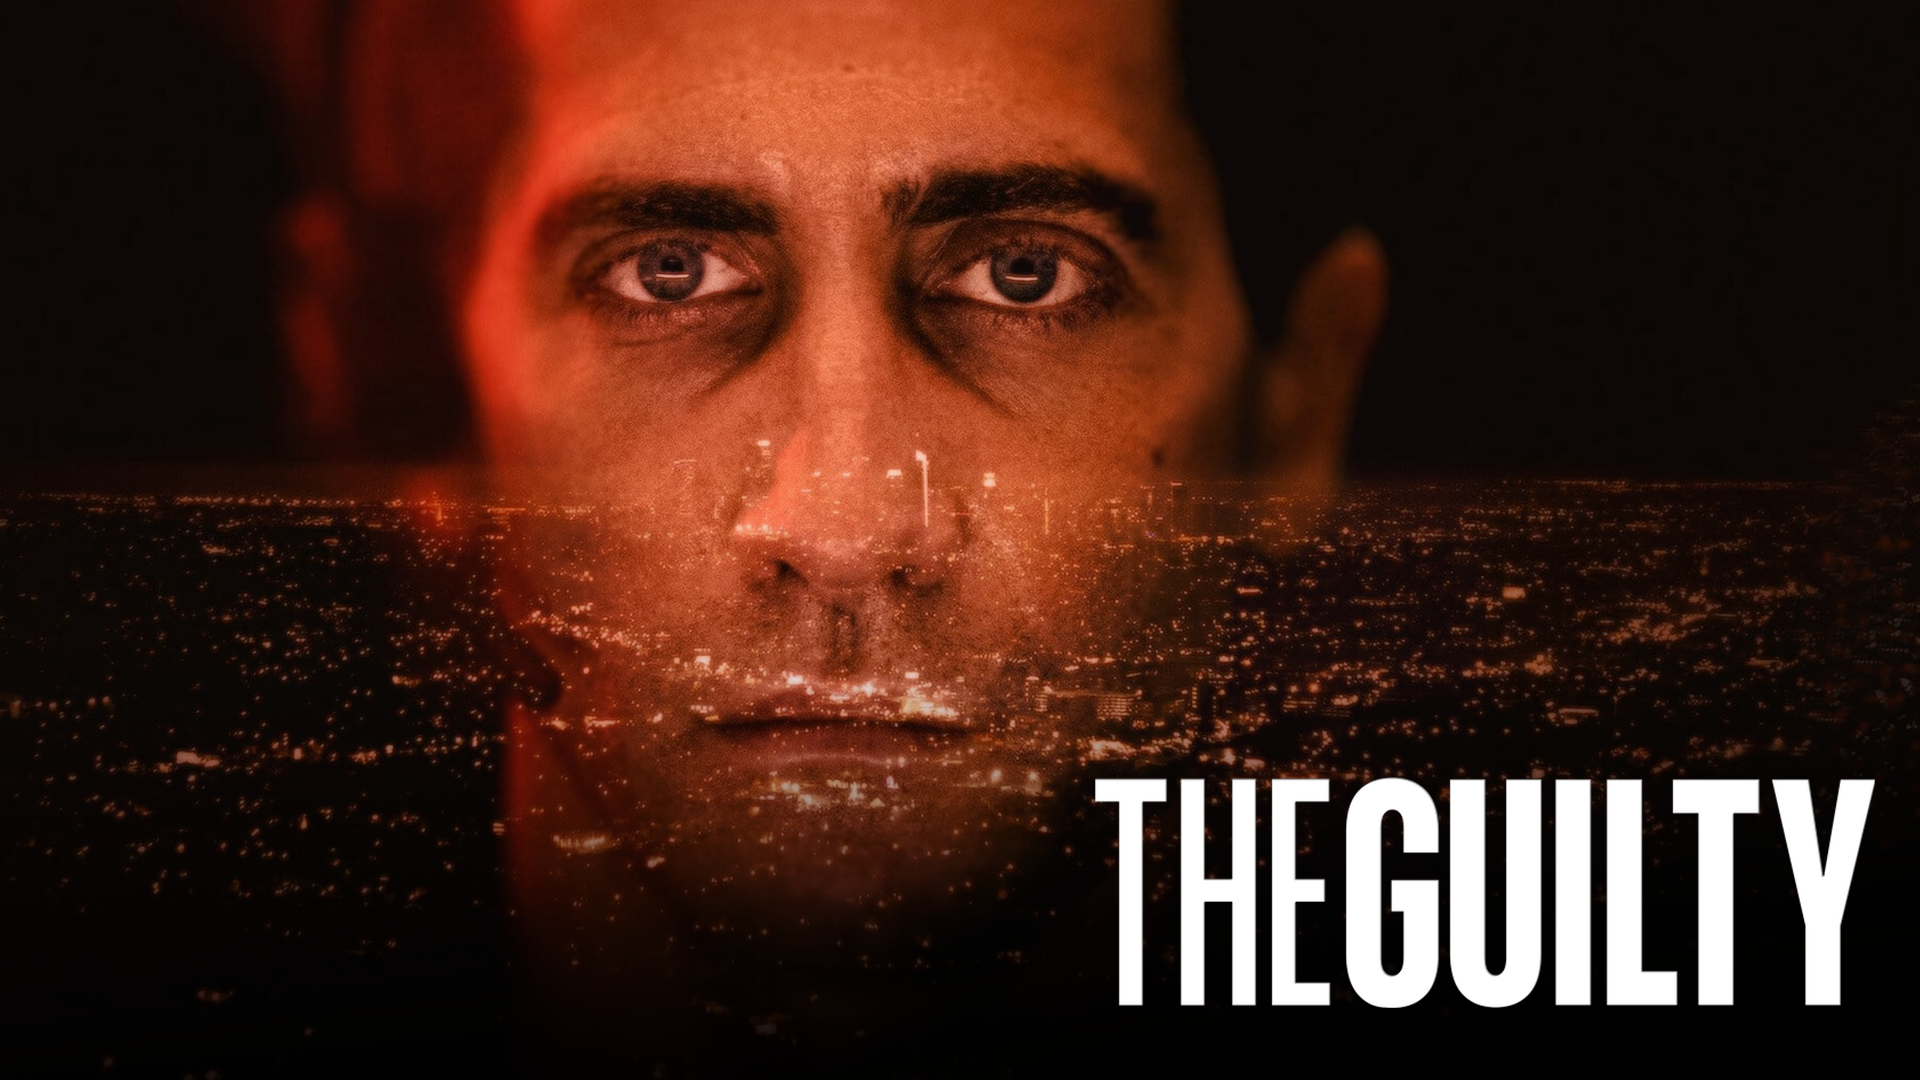 The Guilty, starring Jake Gyllenhaal and directed Antoine Fuqua, bails at presenting police in a new way while succeeding at being a mostly entertaining thriller.